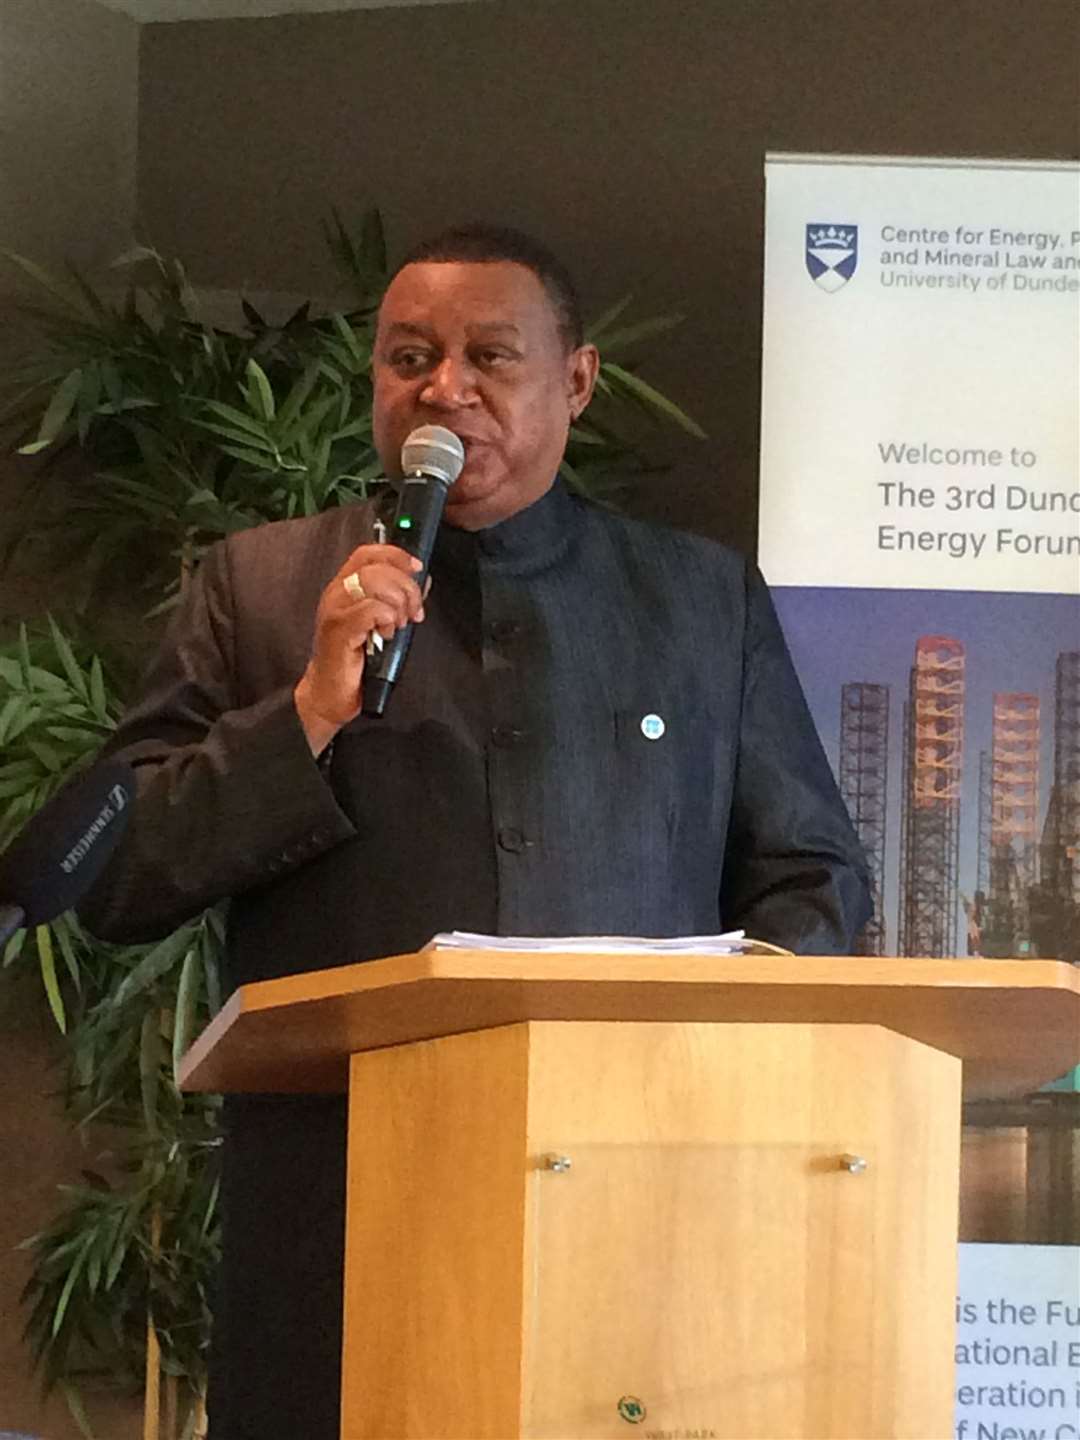 Mohammed Barkindo, the secretary general of the Organization of Petroleum Exporting Countries (OPEC) speaking at the Dundee Energy Forum.